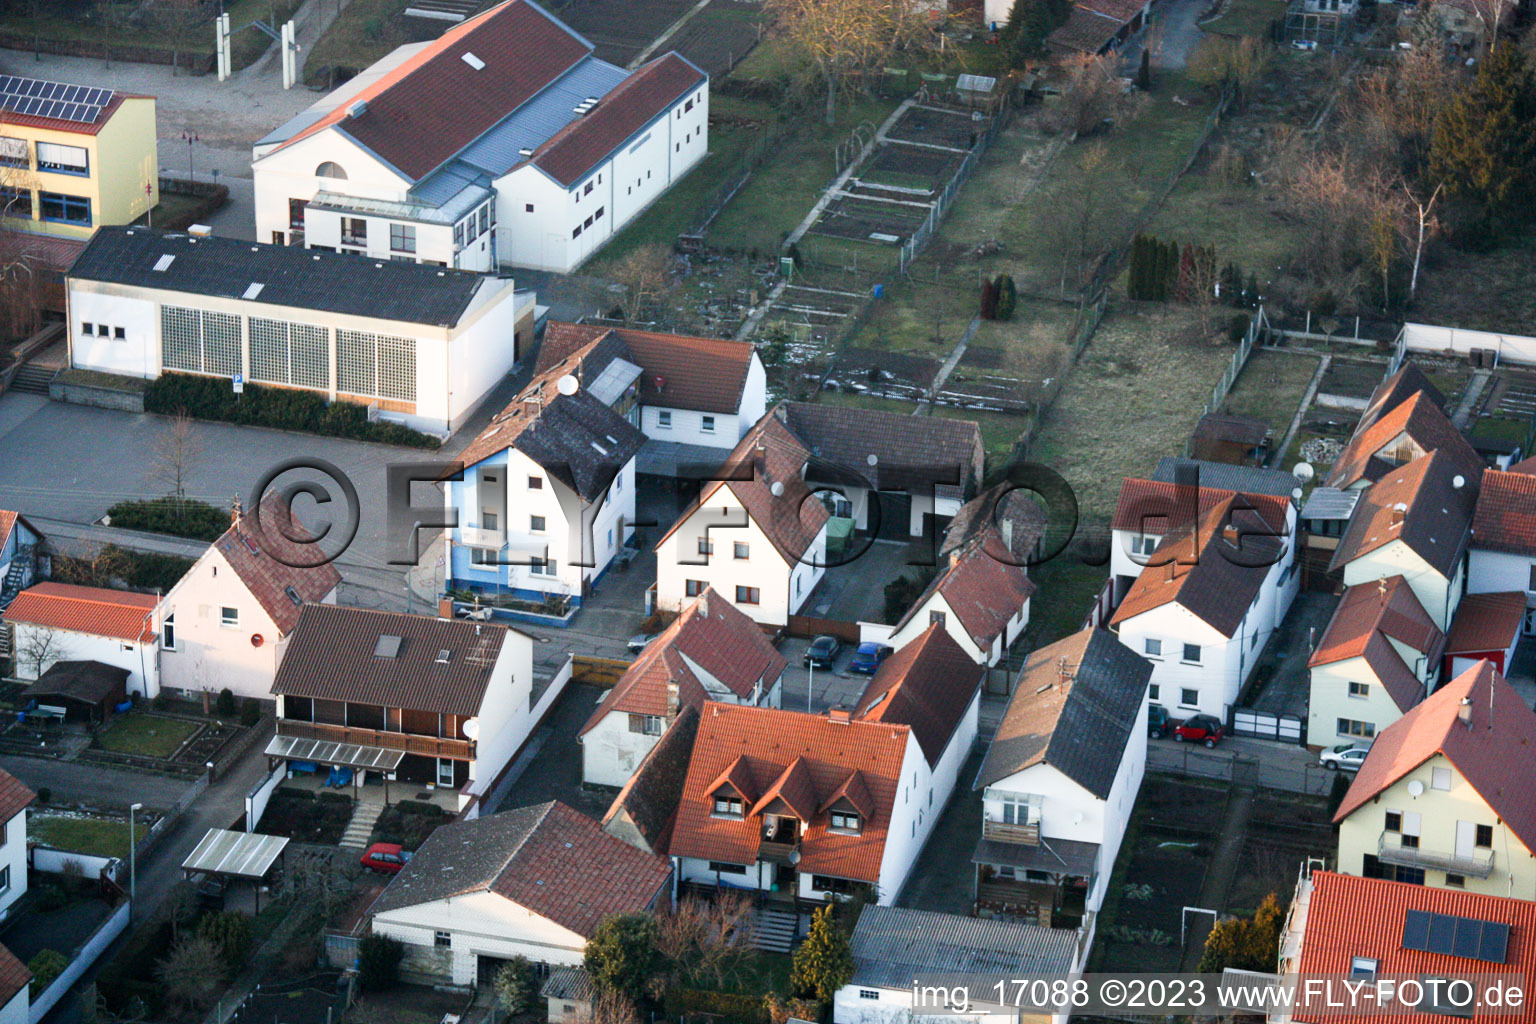 Fire department, sports hall in Minfeld in the state Rhineland-Palatinate, Germany from above